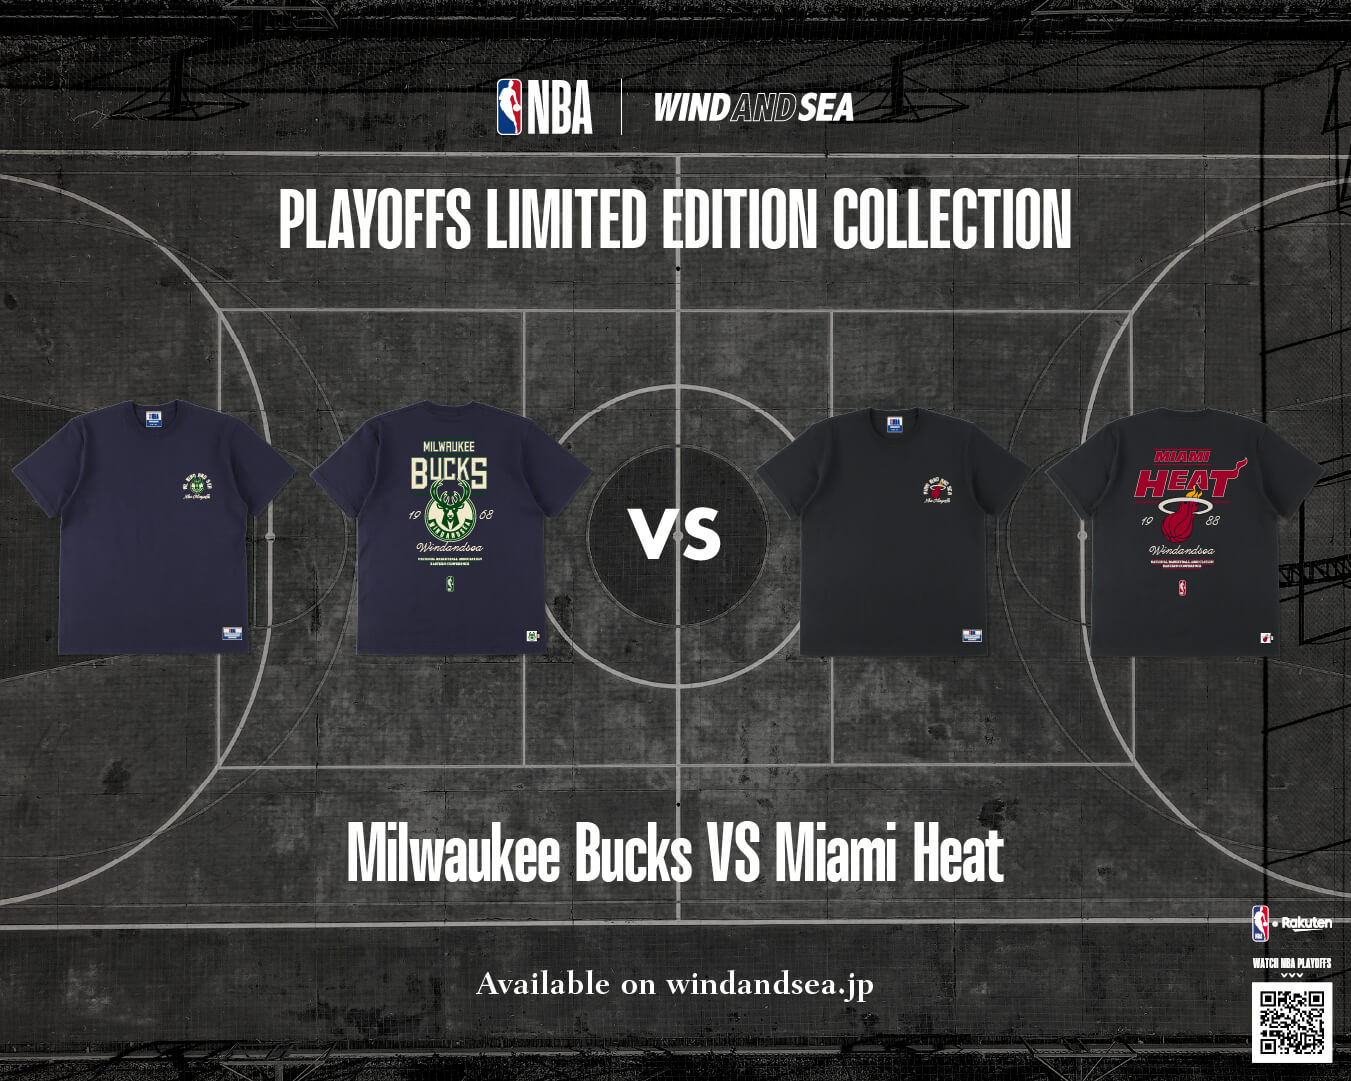 NBA 2023 PLAYOFFS LIMITED EDITION COLLECTION – WIND AND SEA